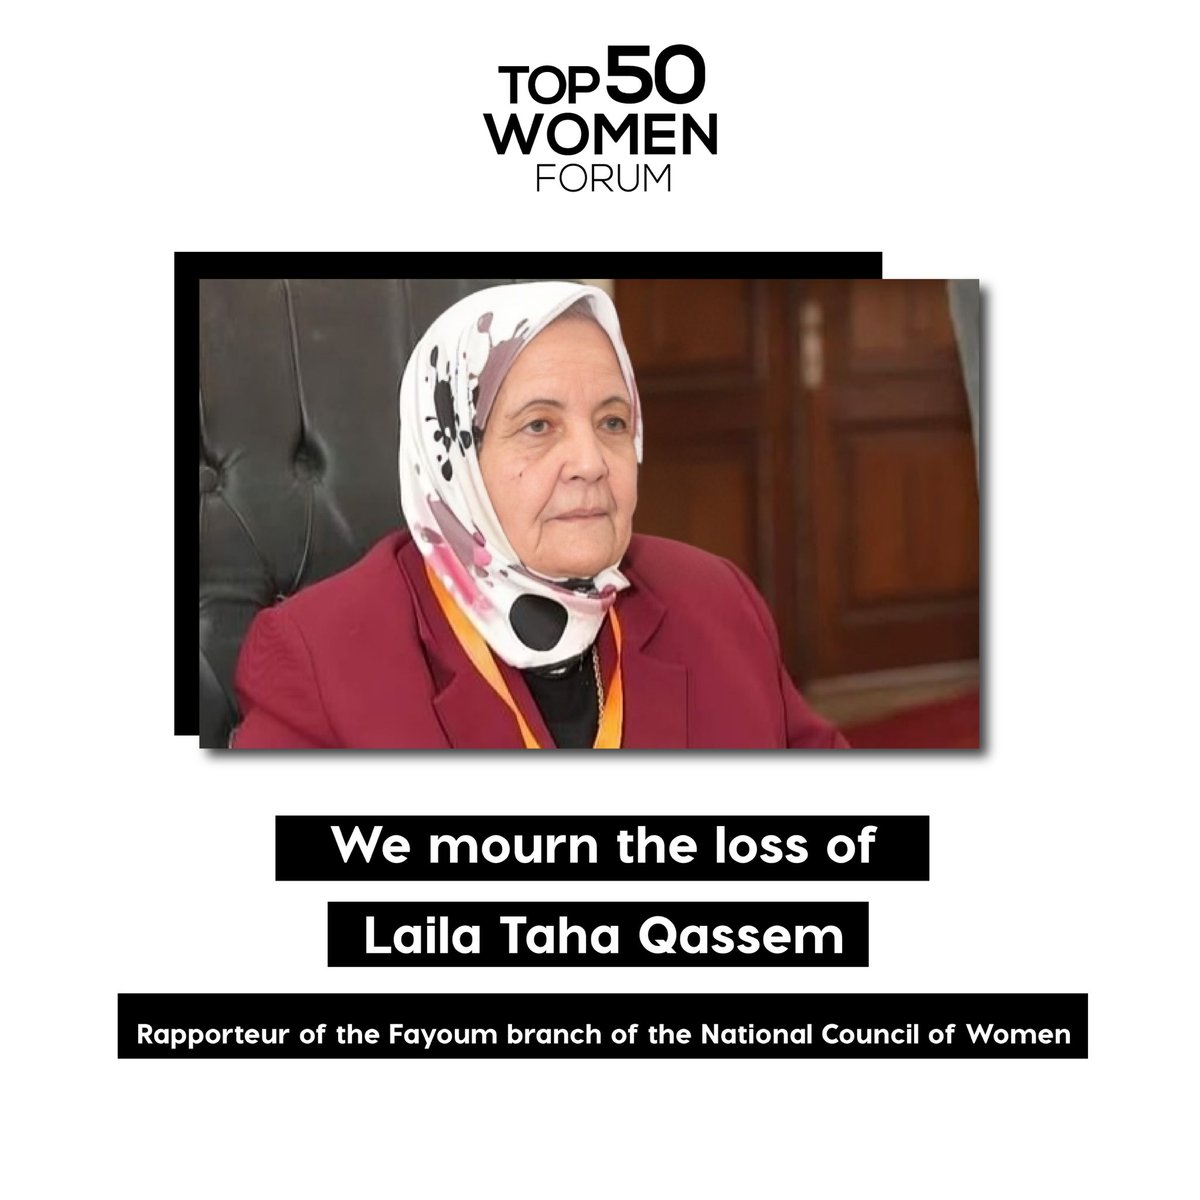 The Top 50 Women Forum, along with all its members, deeply mourns the loss of Ms. Laila Taha Qasim, Rapporteur of the National Women’s Council's branch in Faiyum, who passed away today.